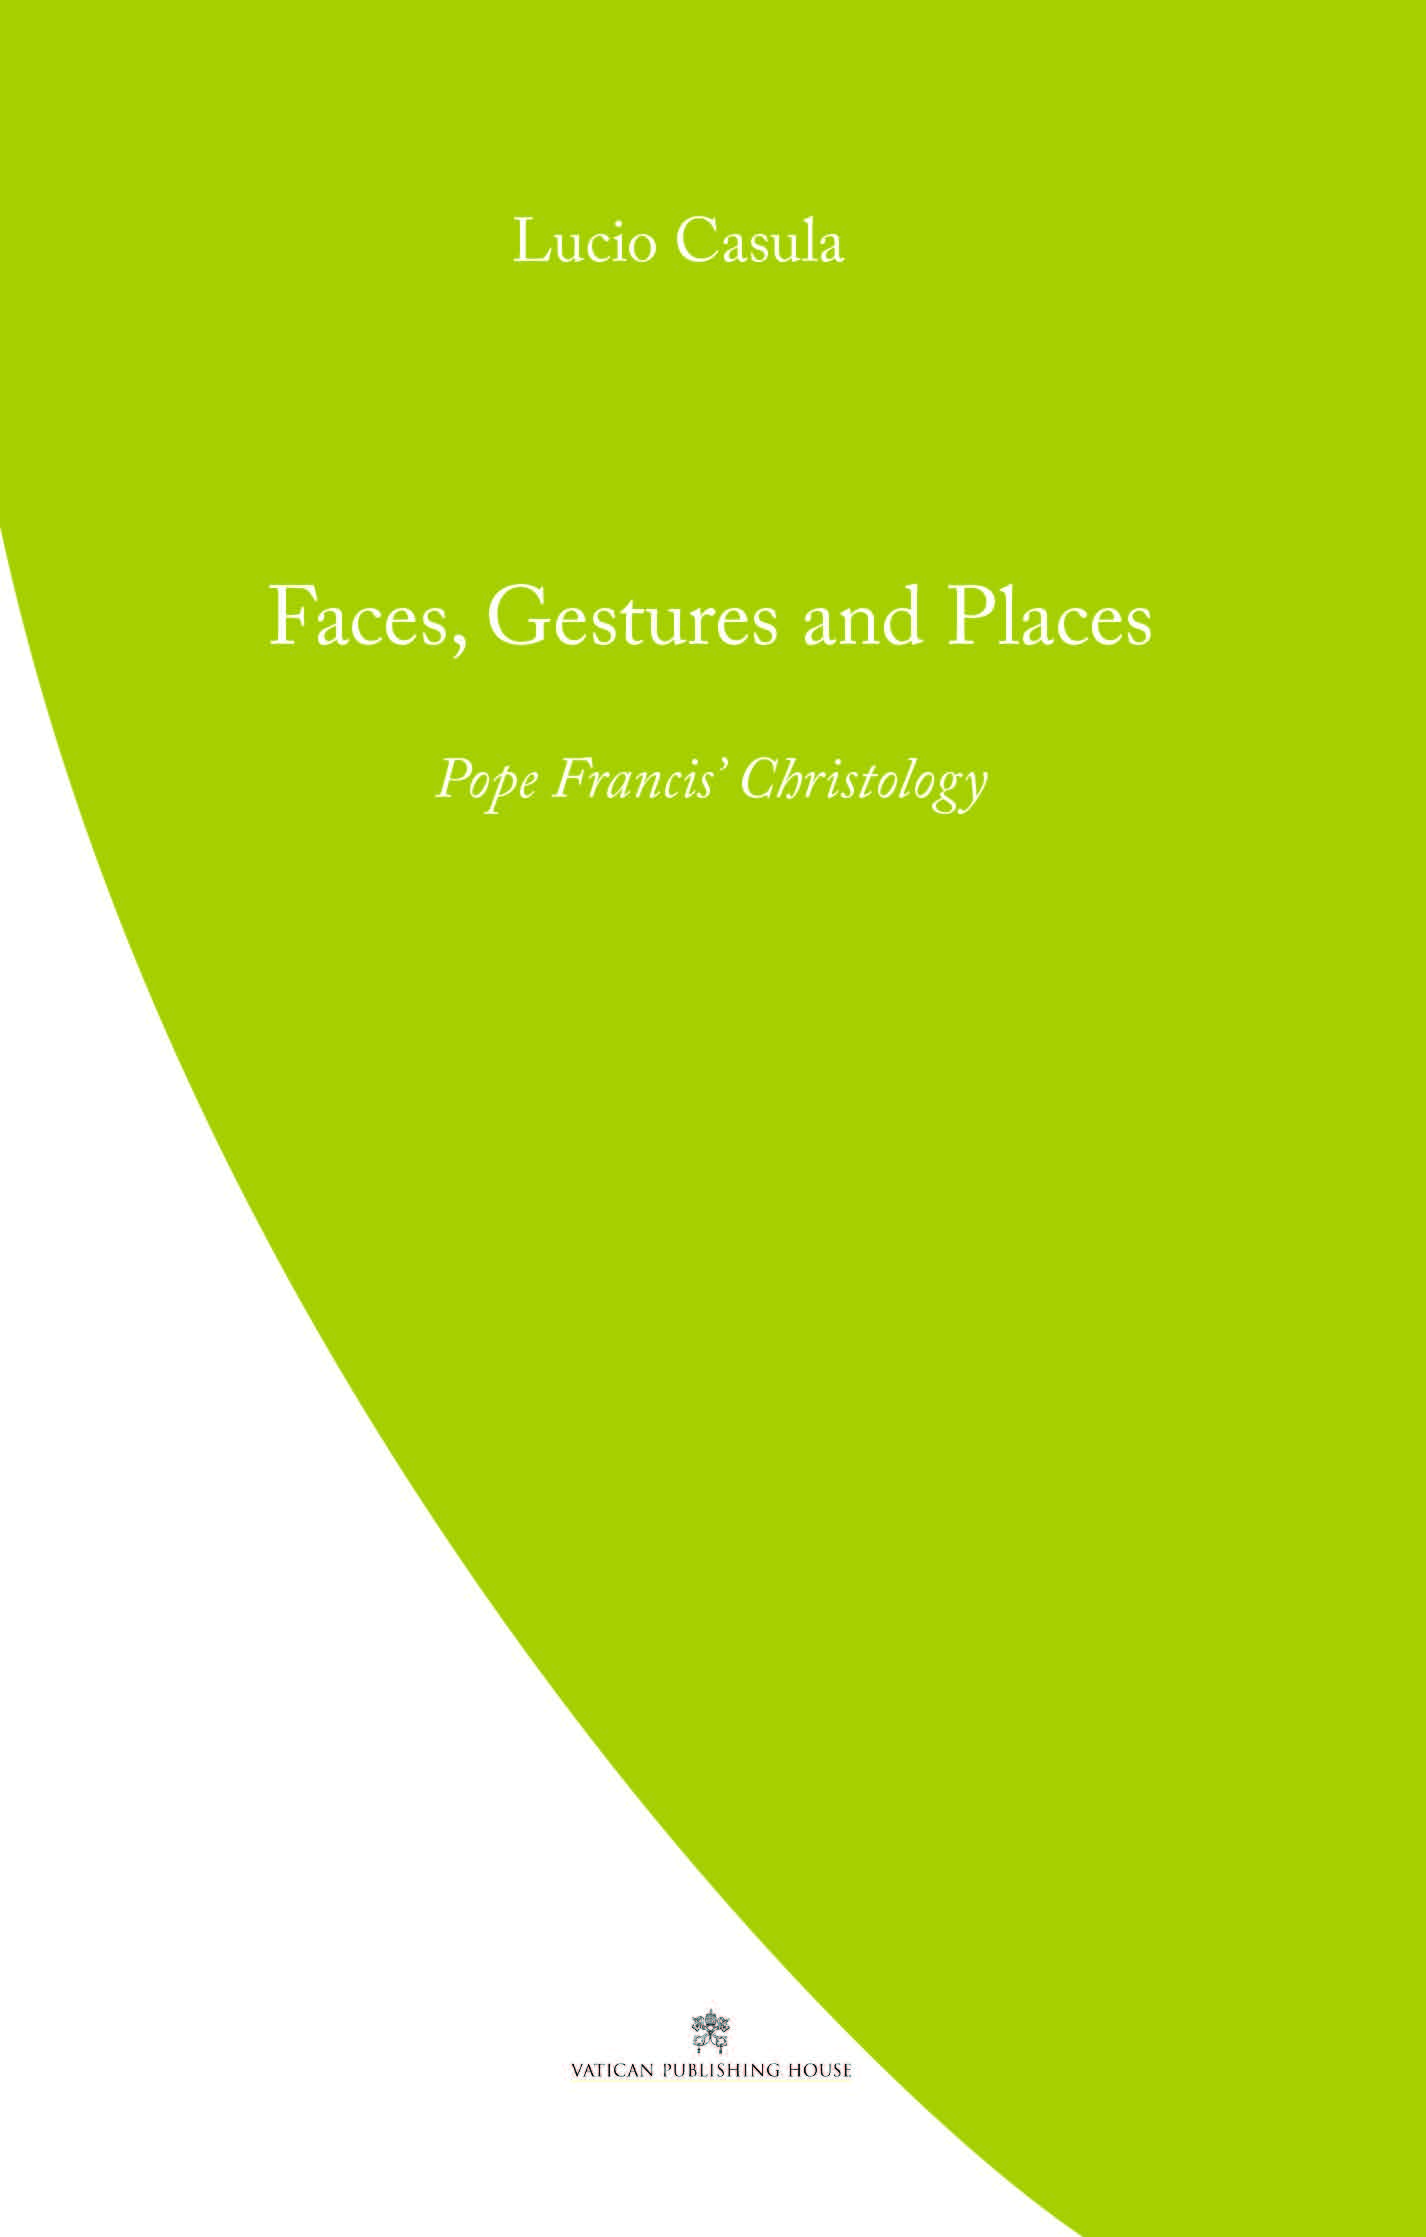 Faces, Gestures and Places  Pope Francis' Christology / Lucio Casula